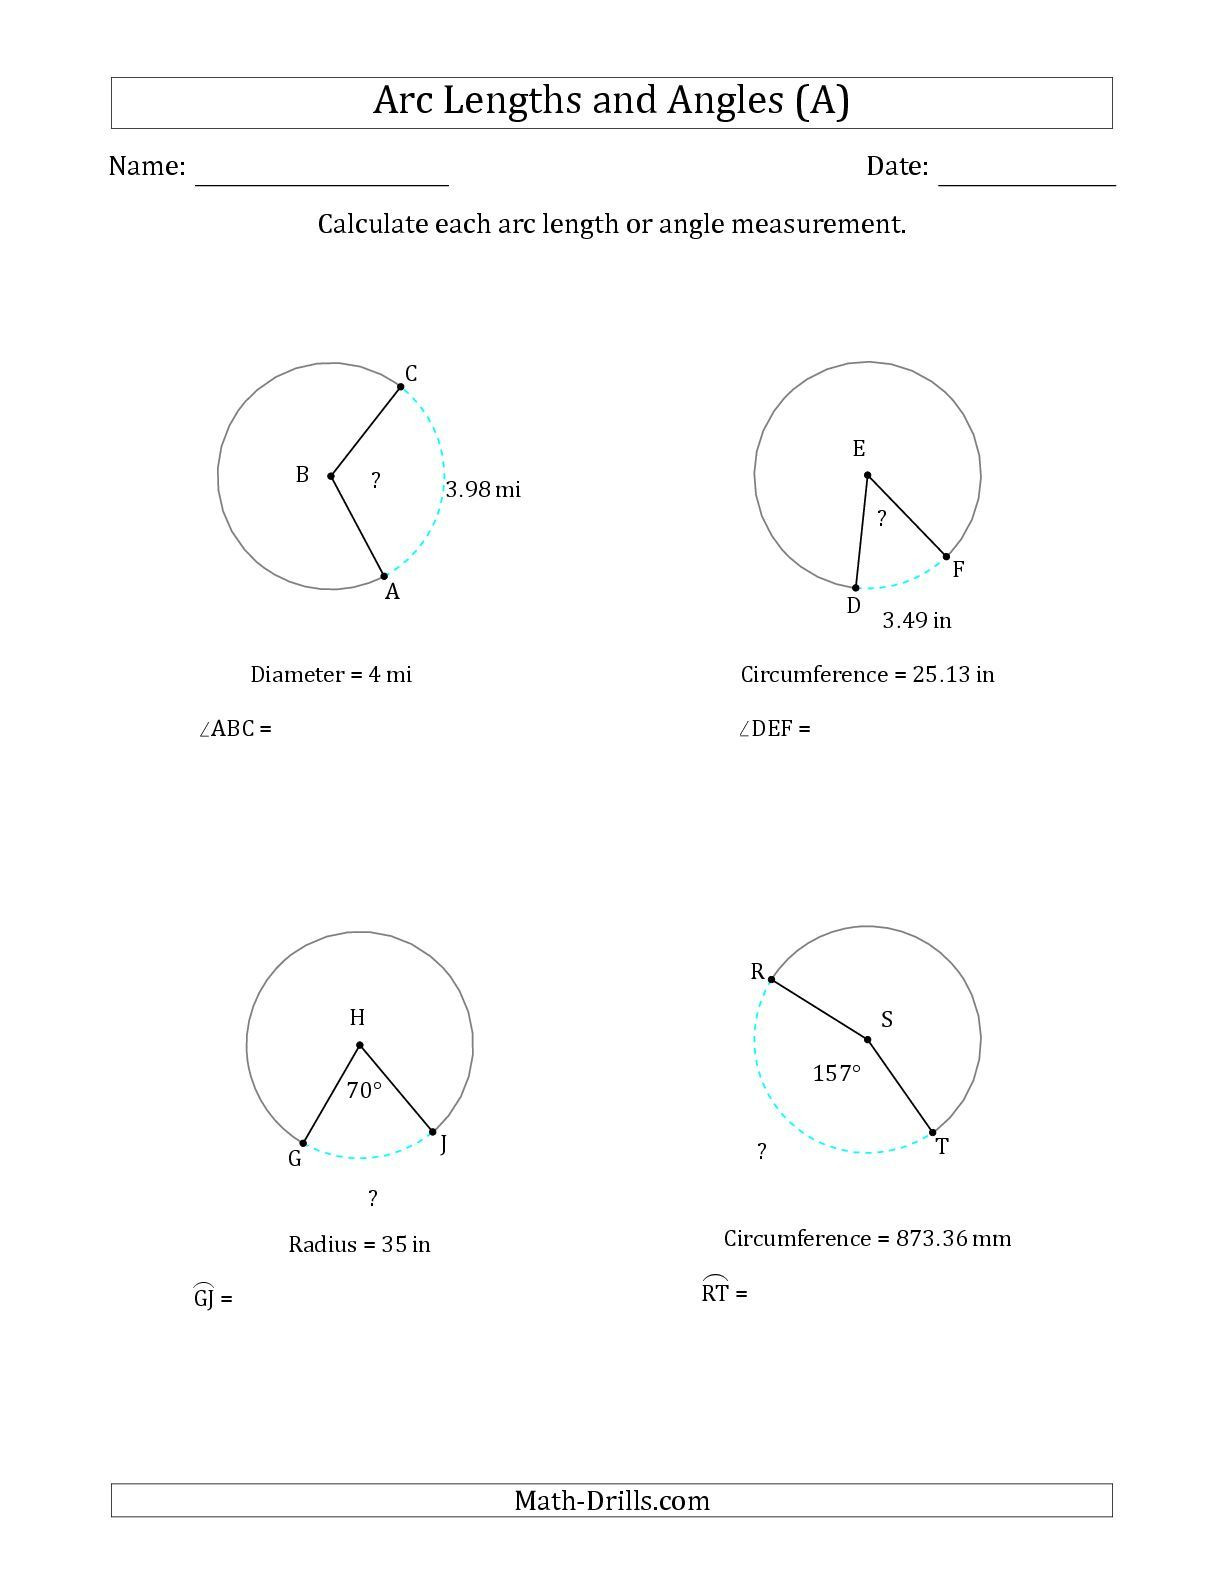 Angles In A Circle Worksheet the Calculating Arc Length or Angle From Circumference